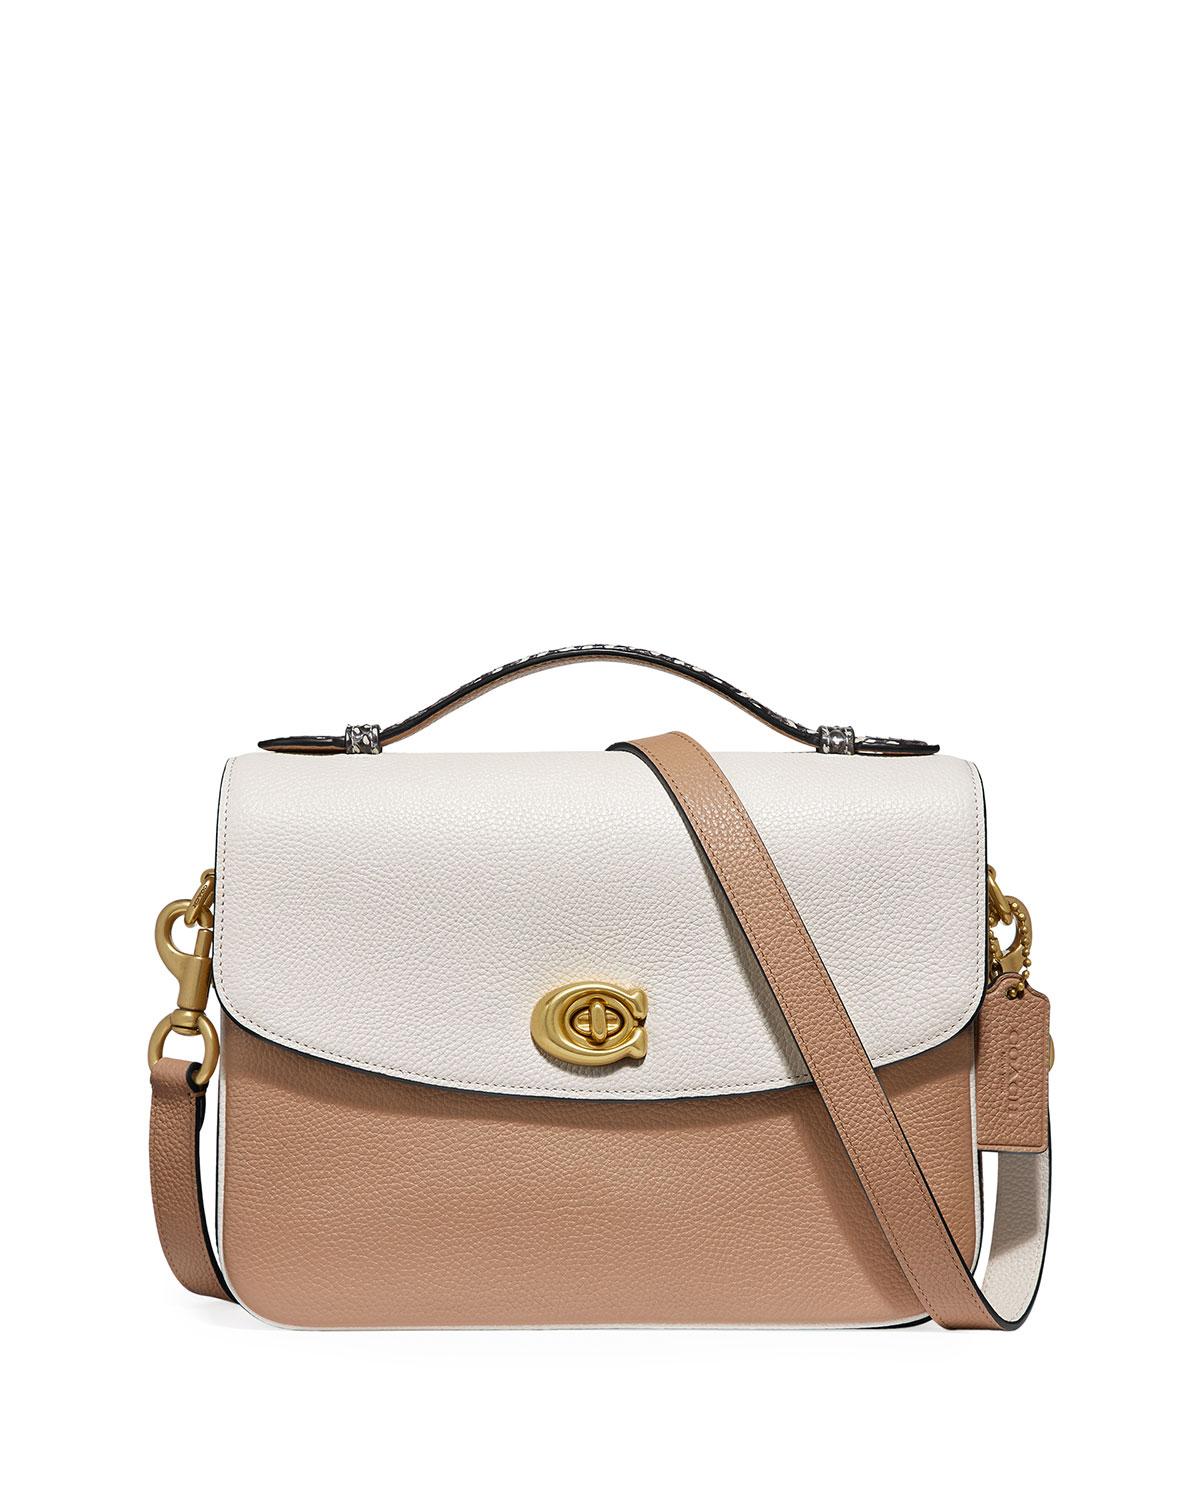 COACH Cassie Colorblock Exotic Crossbody Bag in White - Lyst